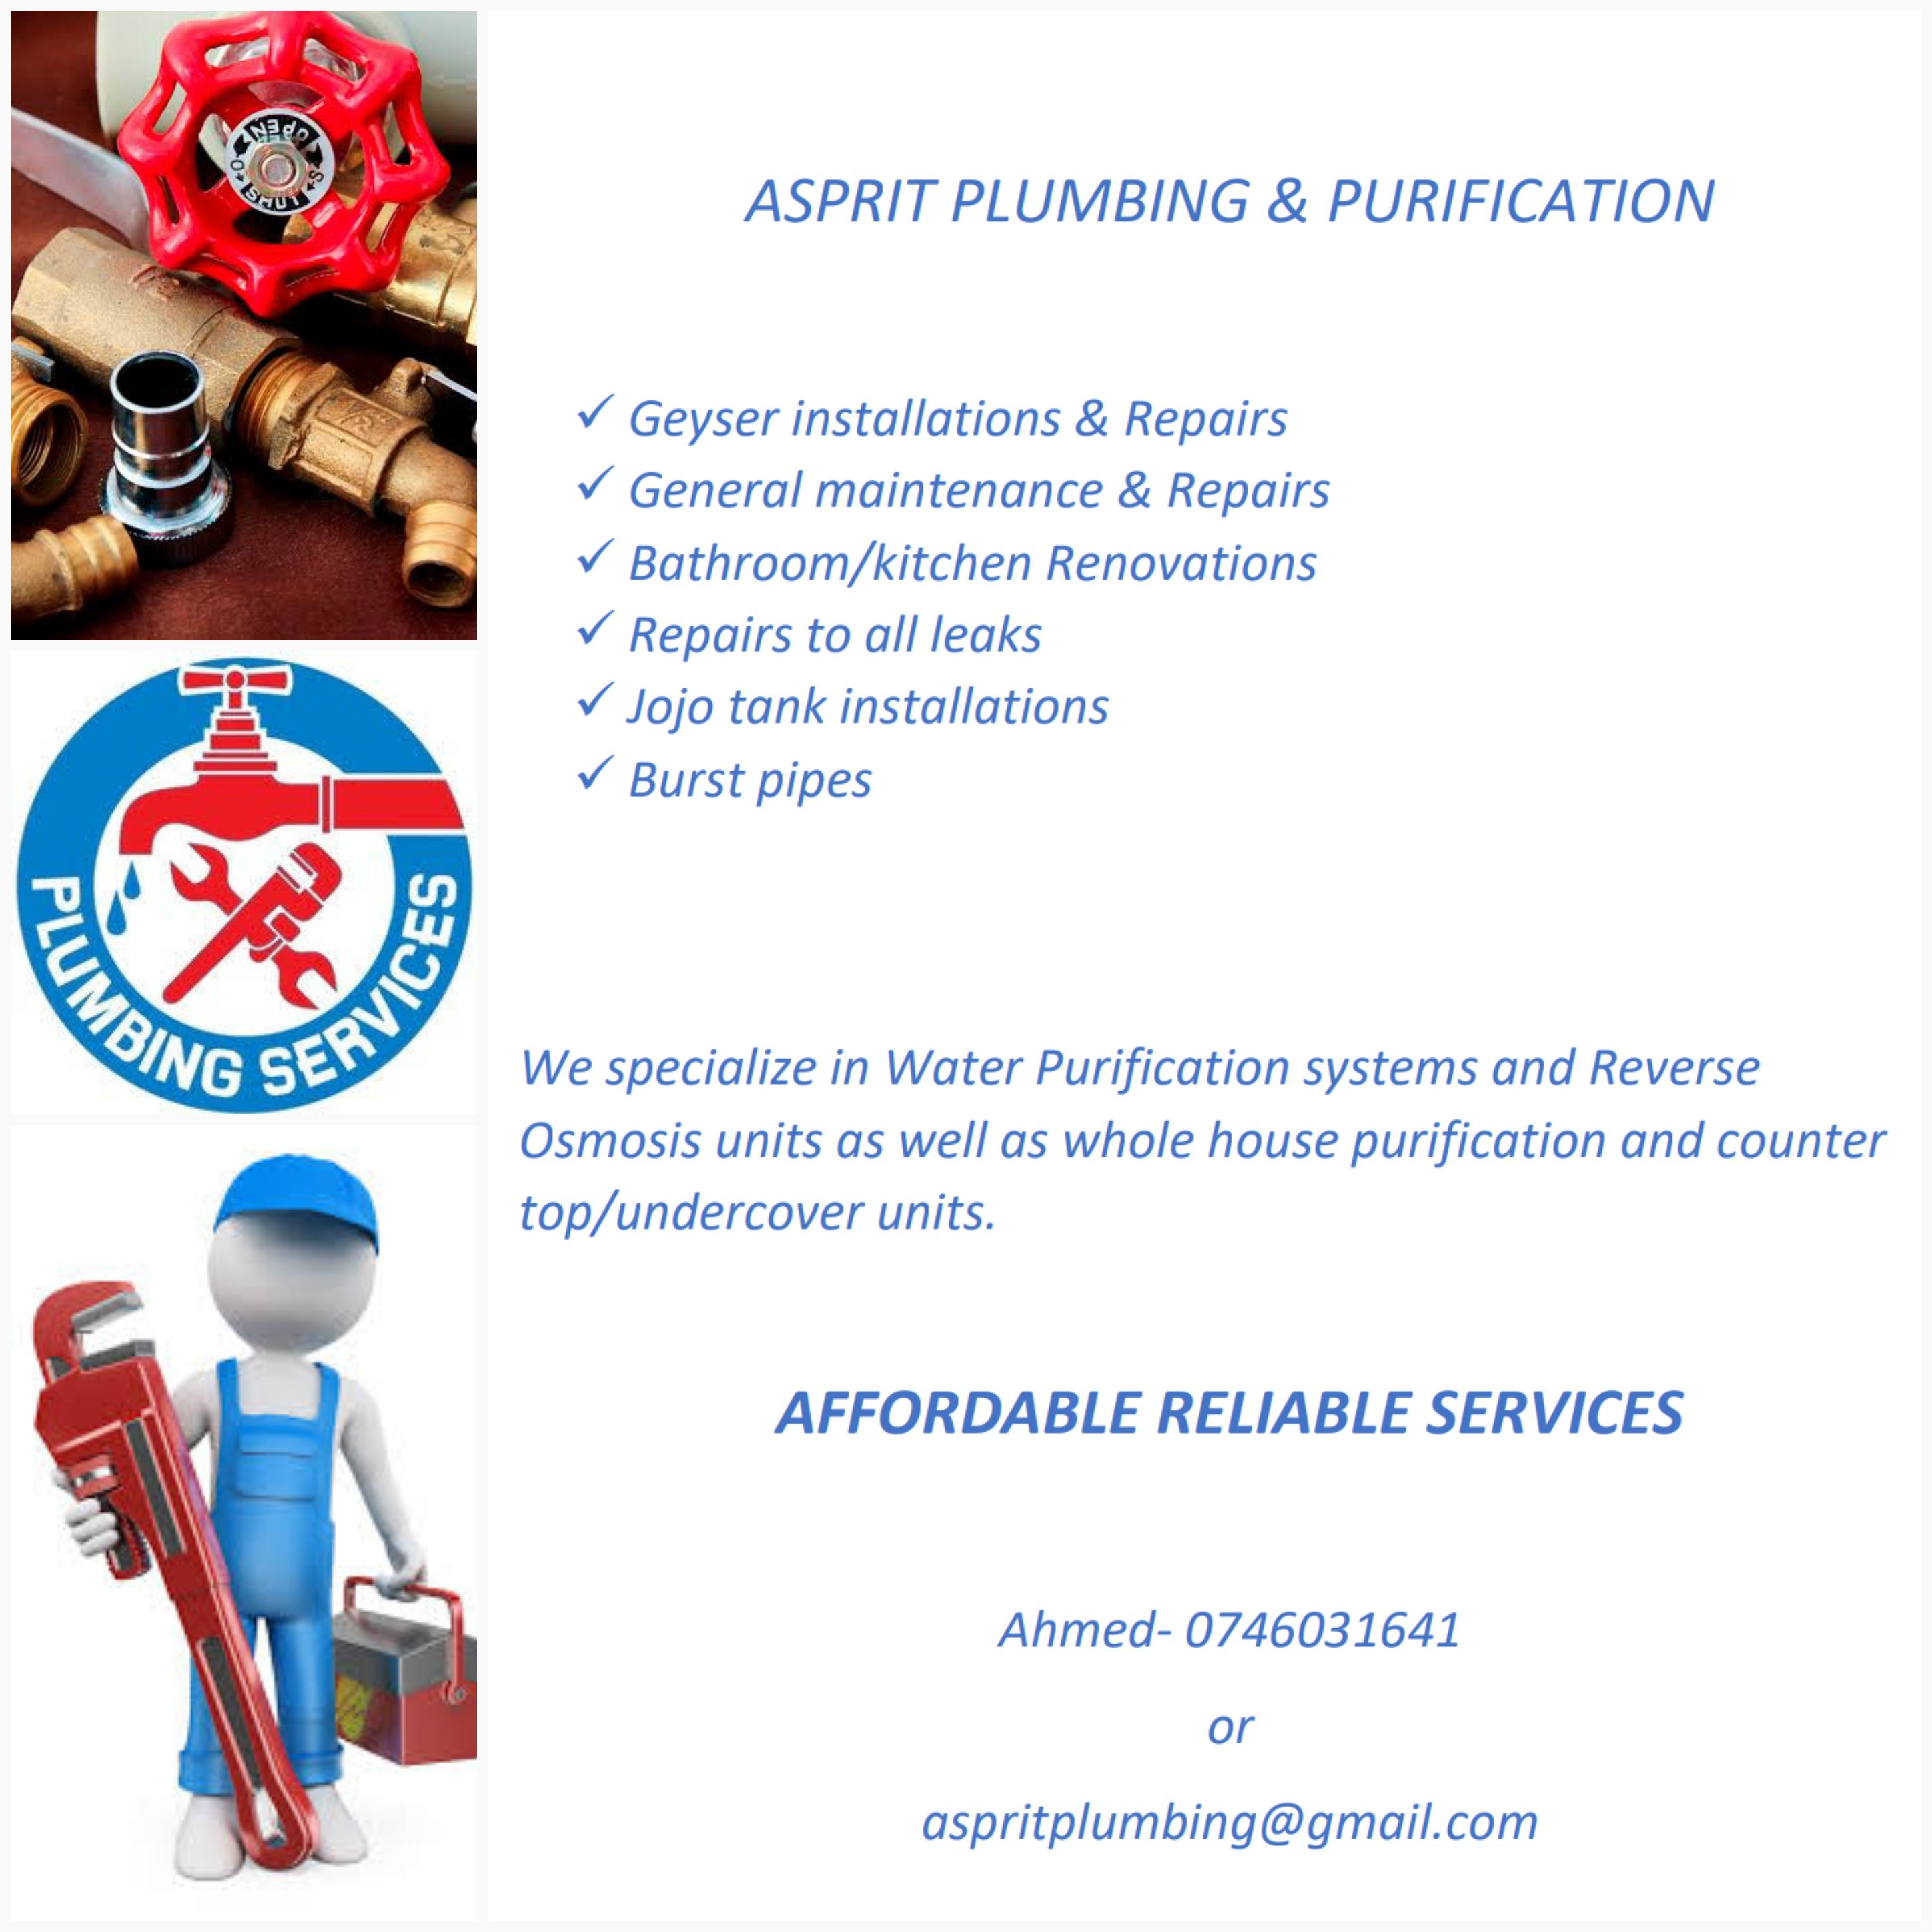 Contact 074 603 1641 for all your plumbing requirments